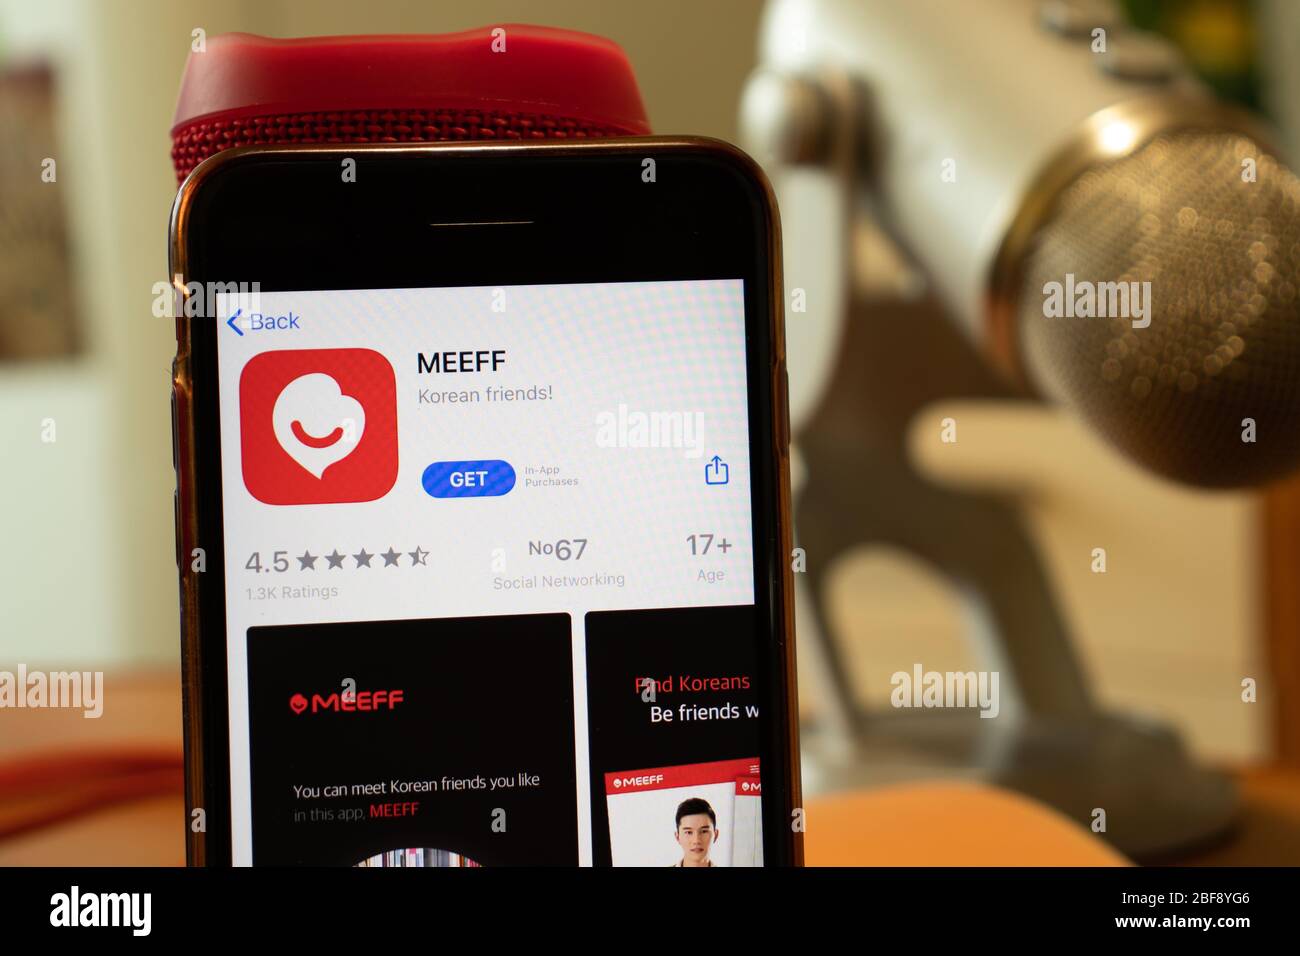 Los Angeles, California, USA - 16 April 2020: MEEFF logo on screen close up. App store icon visible on phone display, Illustrative Editorial Stock Photo